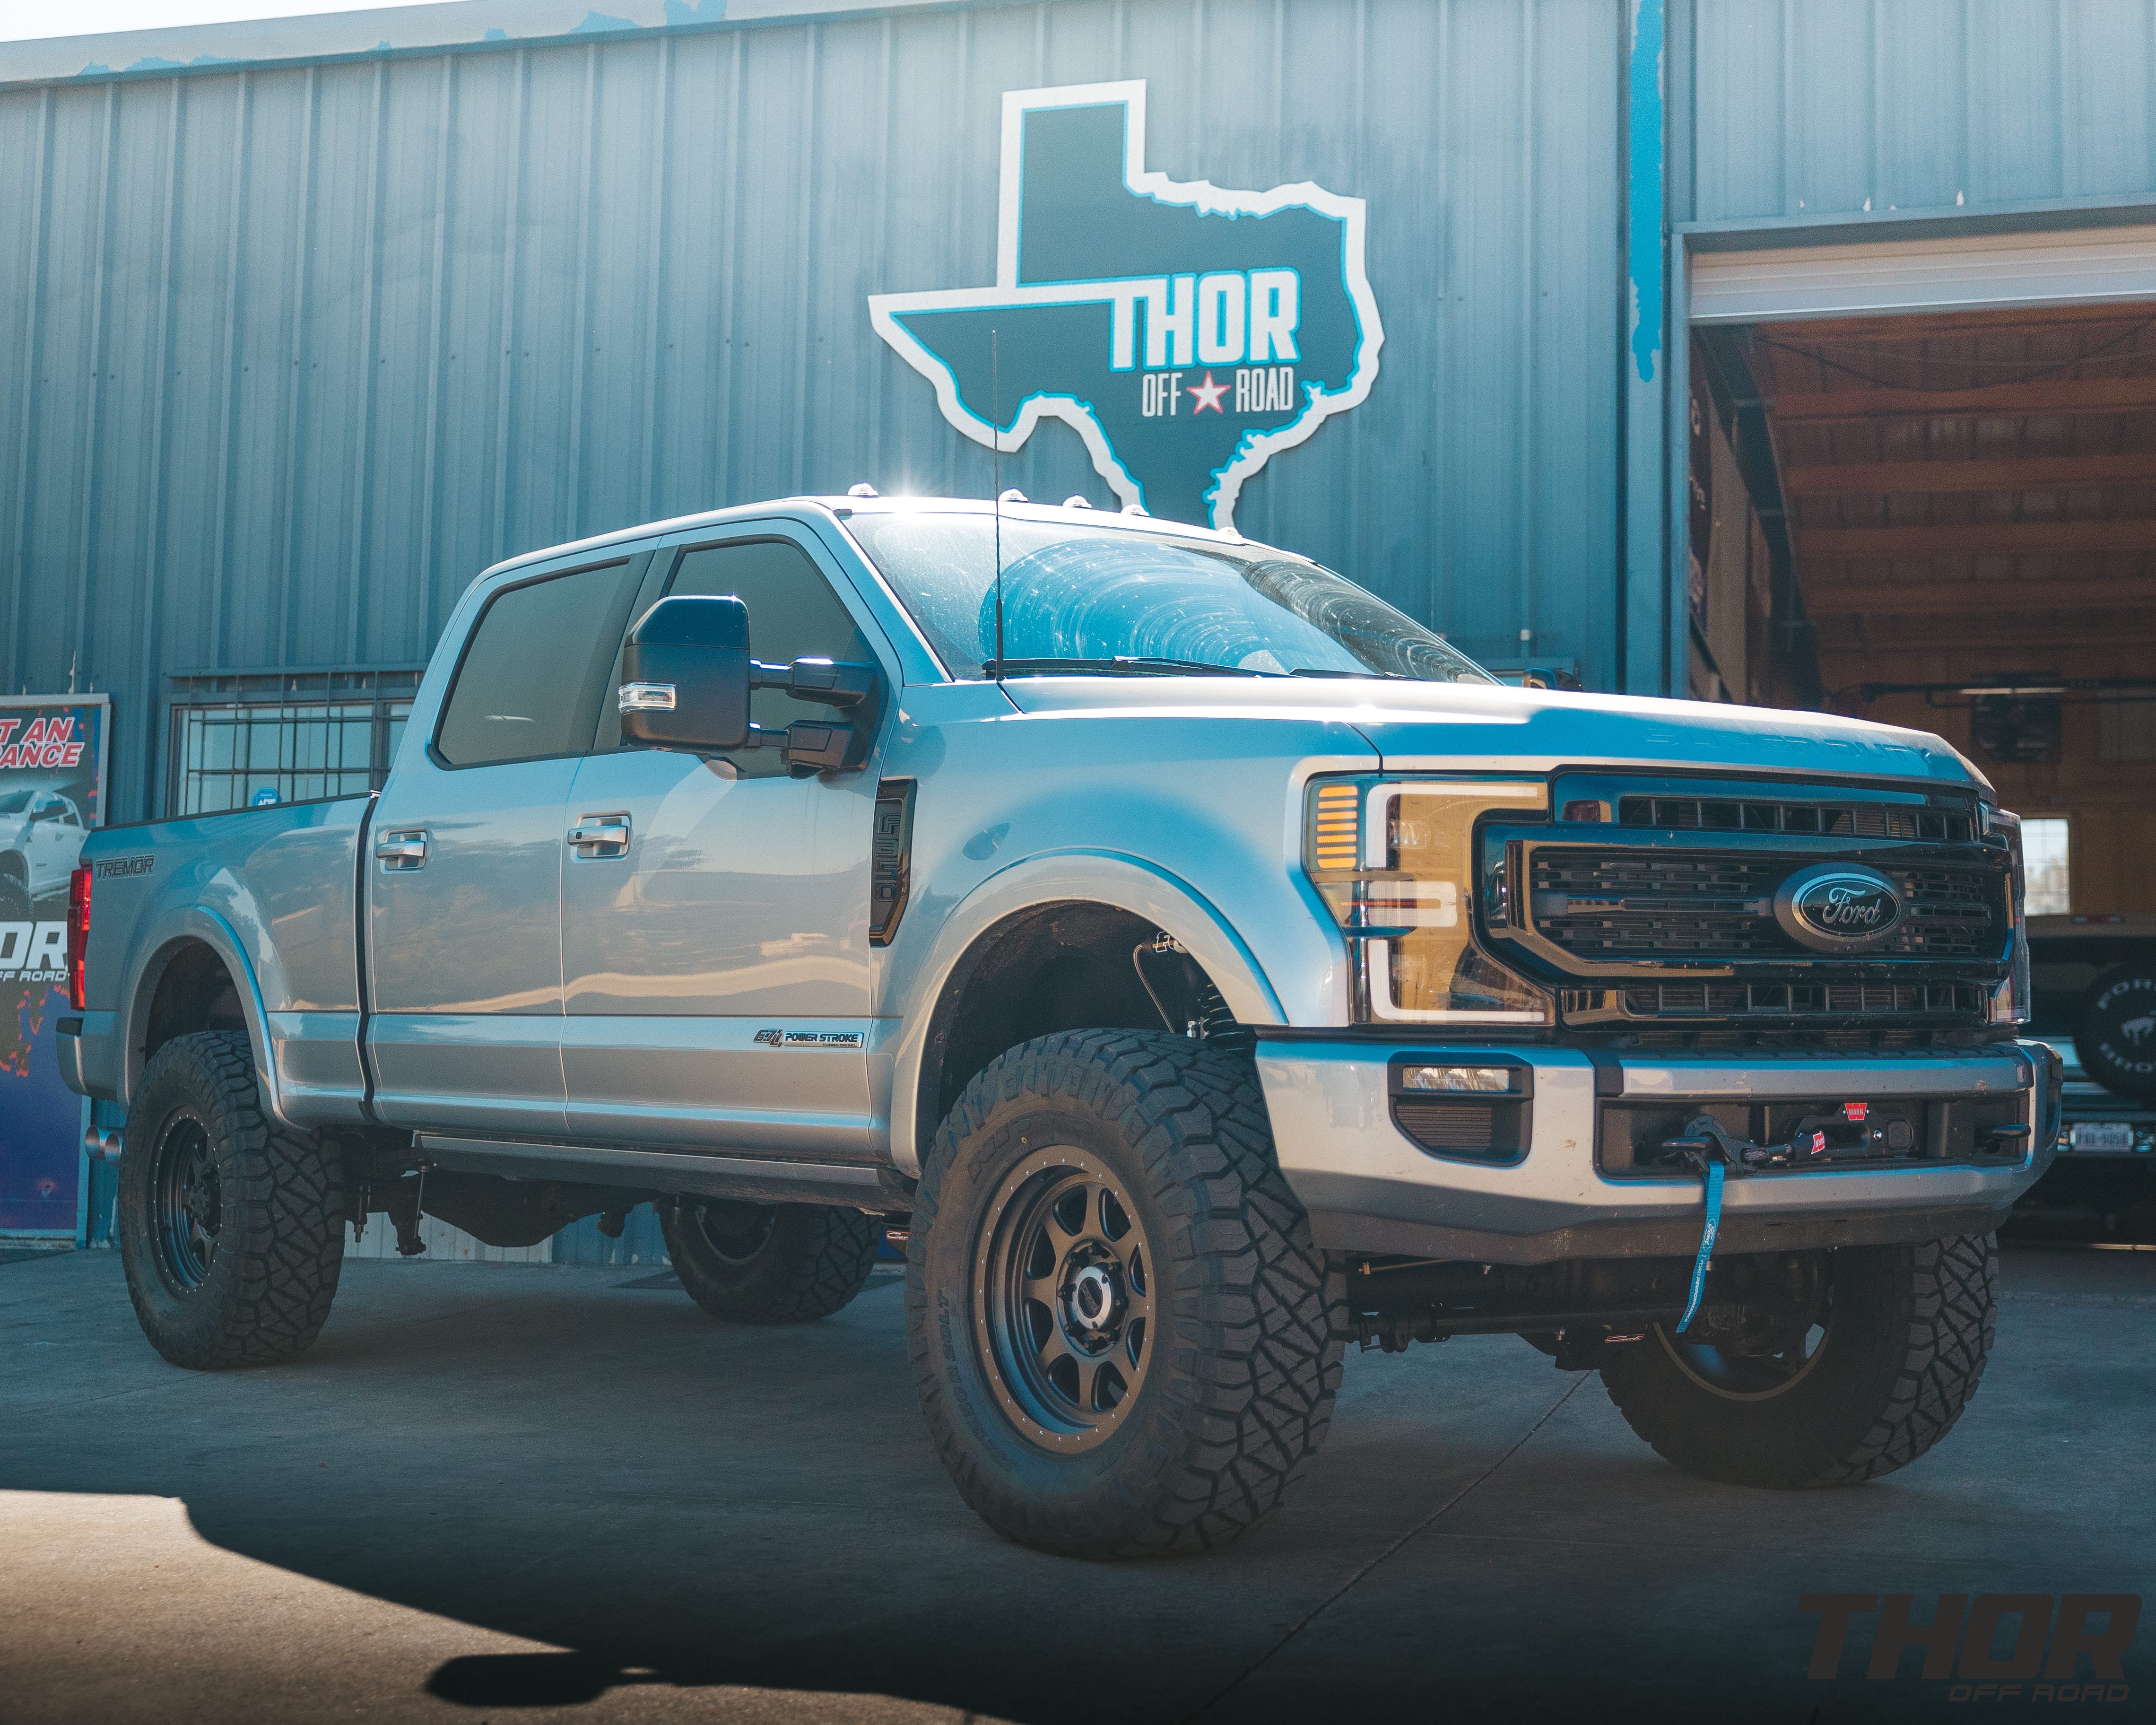 2022 Ford F-350 Super Duty Lariat in Silver with Carli 5.5" Backcountry Suspension Kit, Carli Full Rear Spring Replacement, Carli Long Travel Air Bag Kit, Carli High Mount Steering Stabilizer, Carli Low Mount Steering Stabilizer, Carli Torsion Sway Bar, Carli Radius Arms